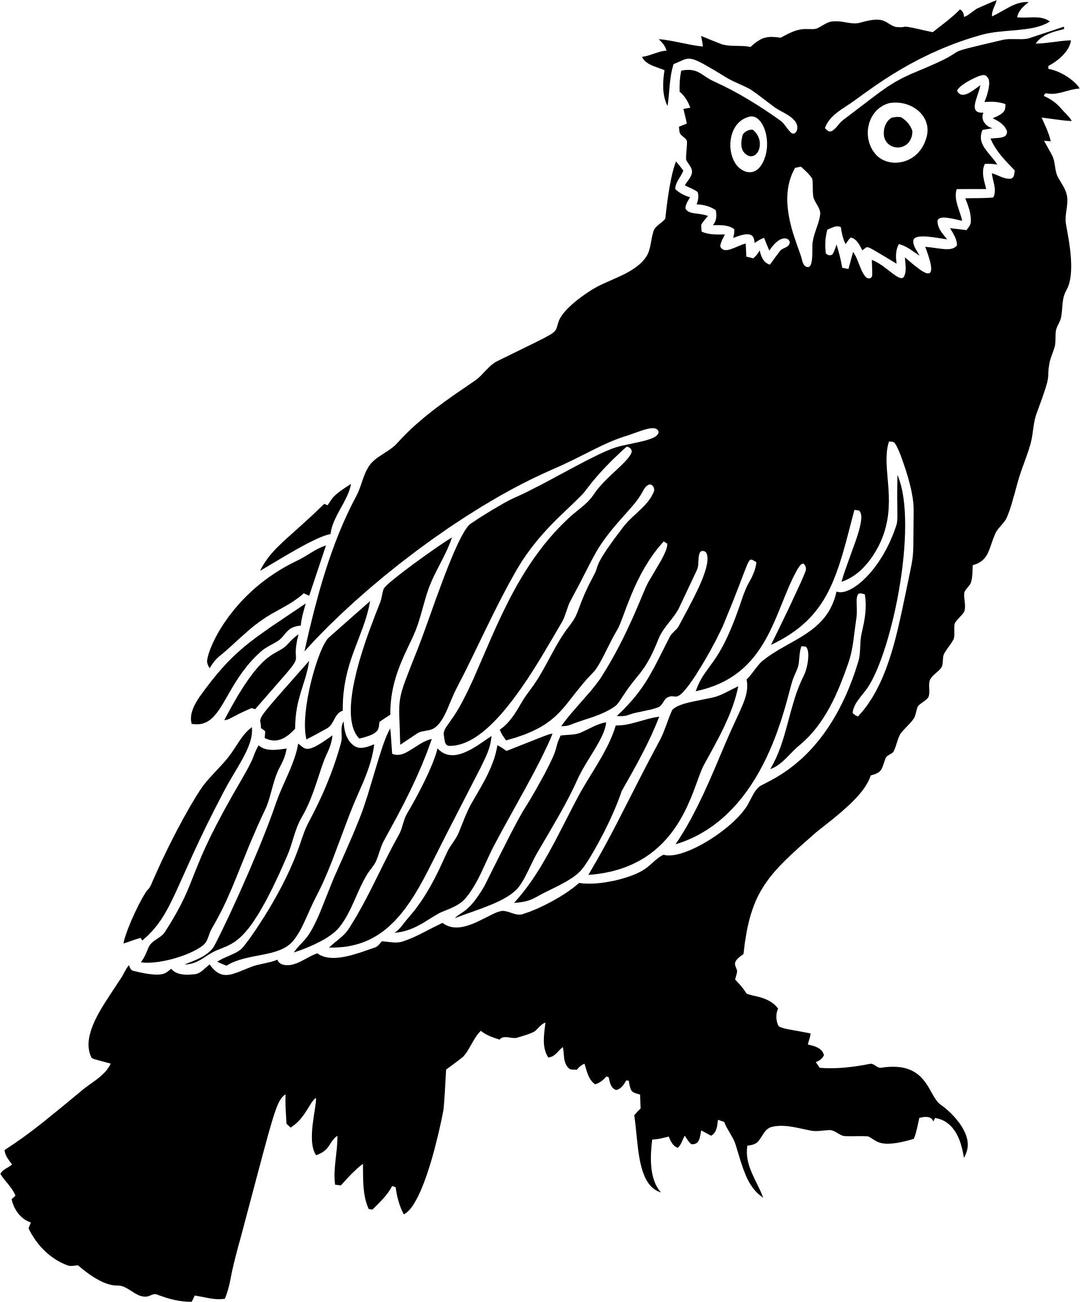 Detailed Owl Silhouette png transparent